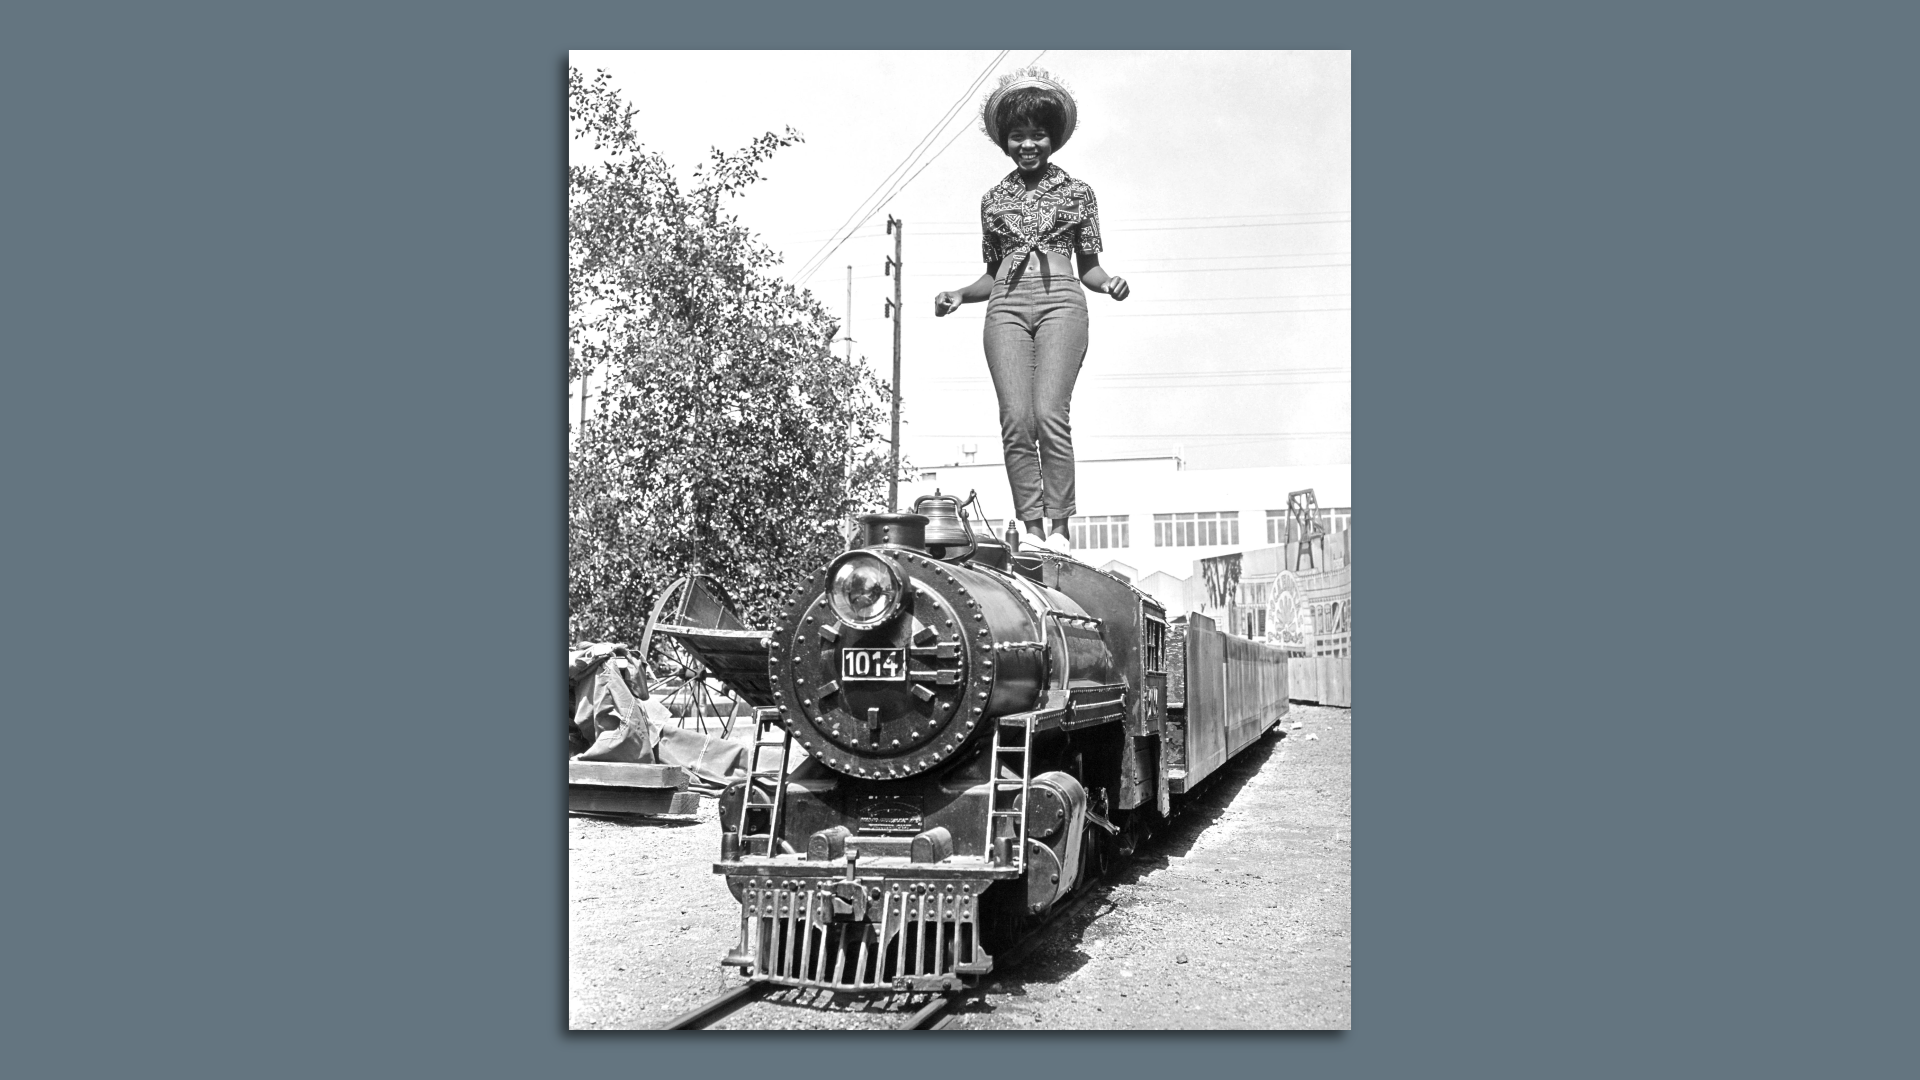 Little Eva (Eva Narcissus Boyd) poses on a miniature train for her album cover session in 1962. 